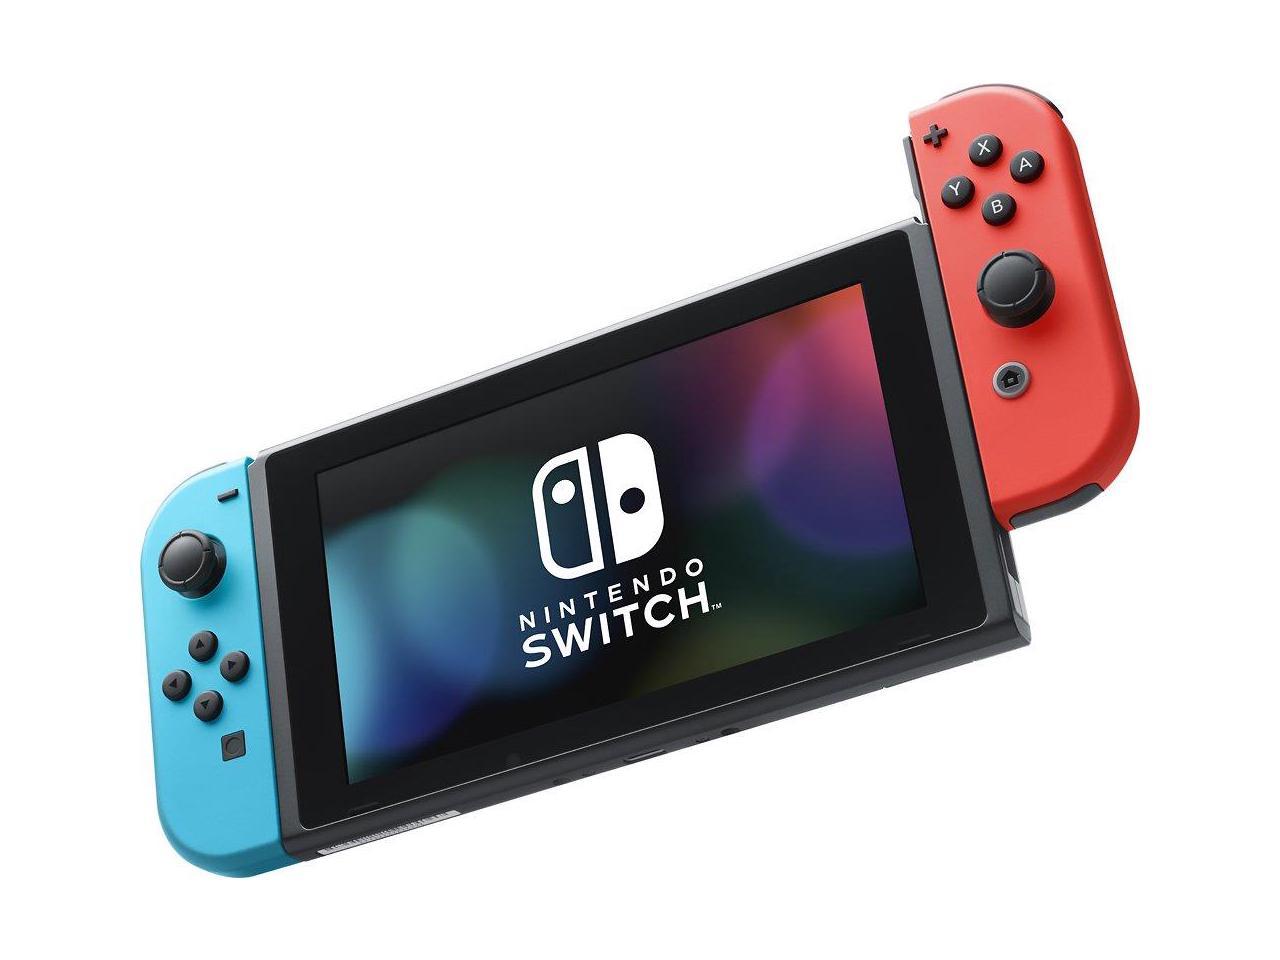 nintendo switch console with improved battery